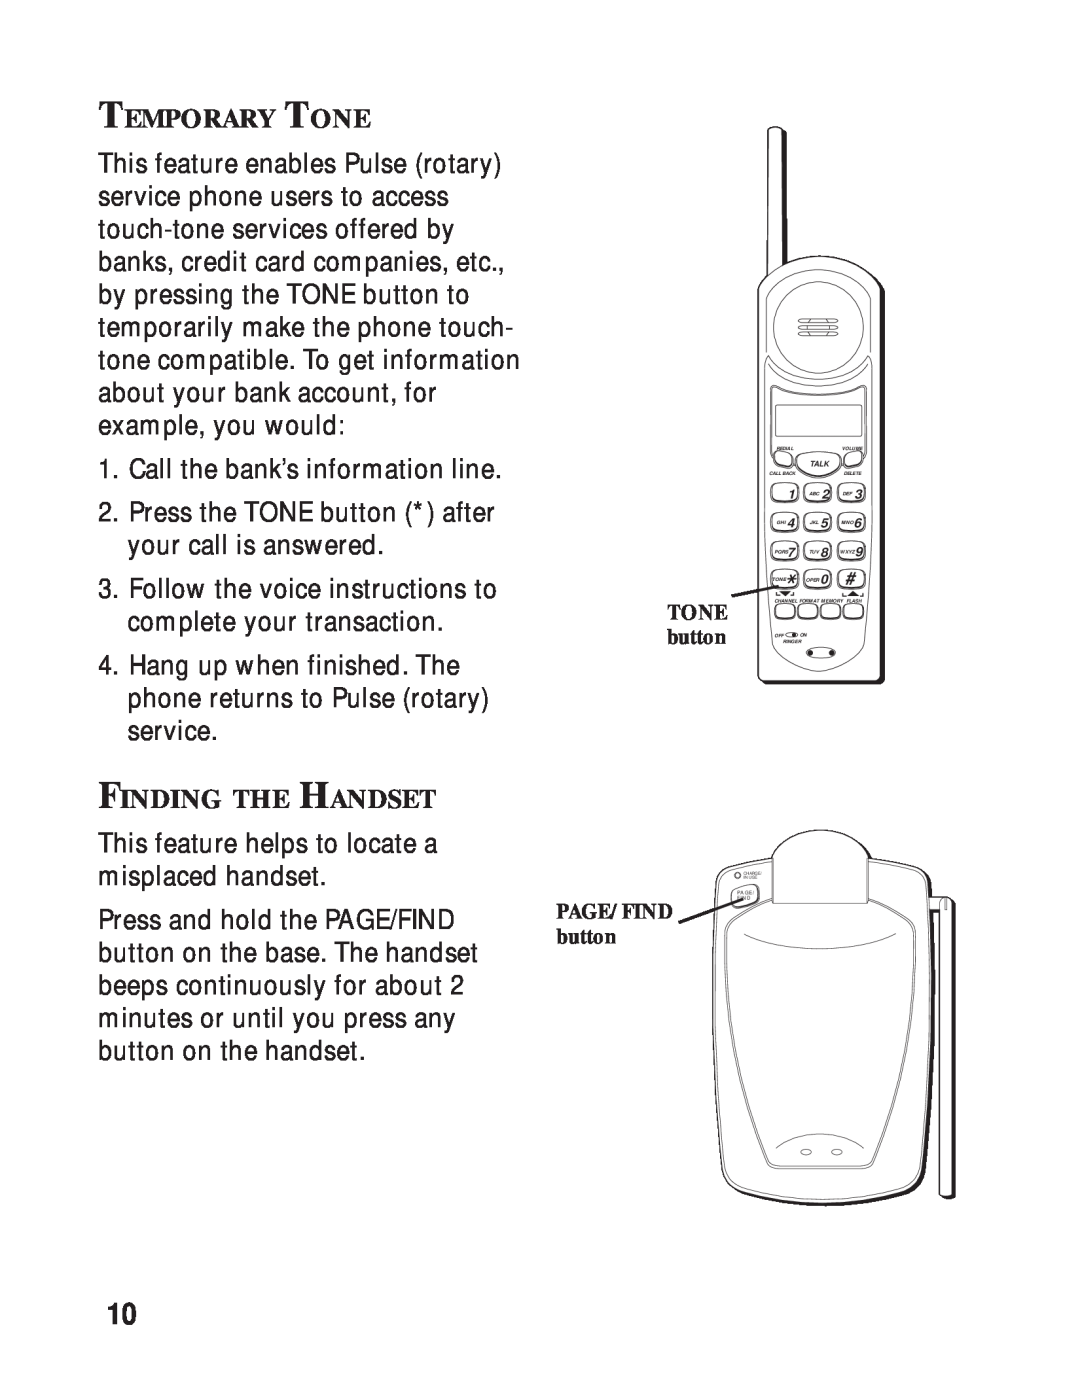 RCA 26730 manual Temporary Tone, Finding The Handset 